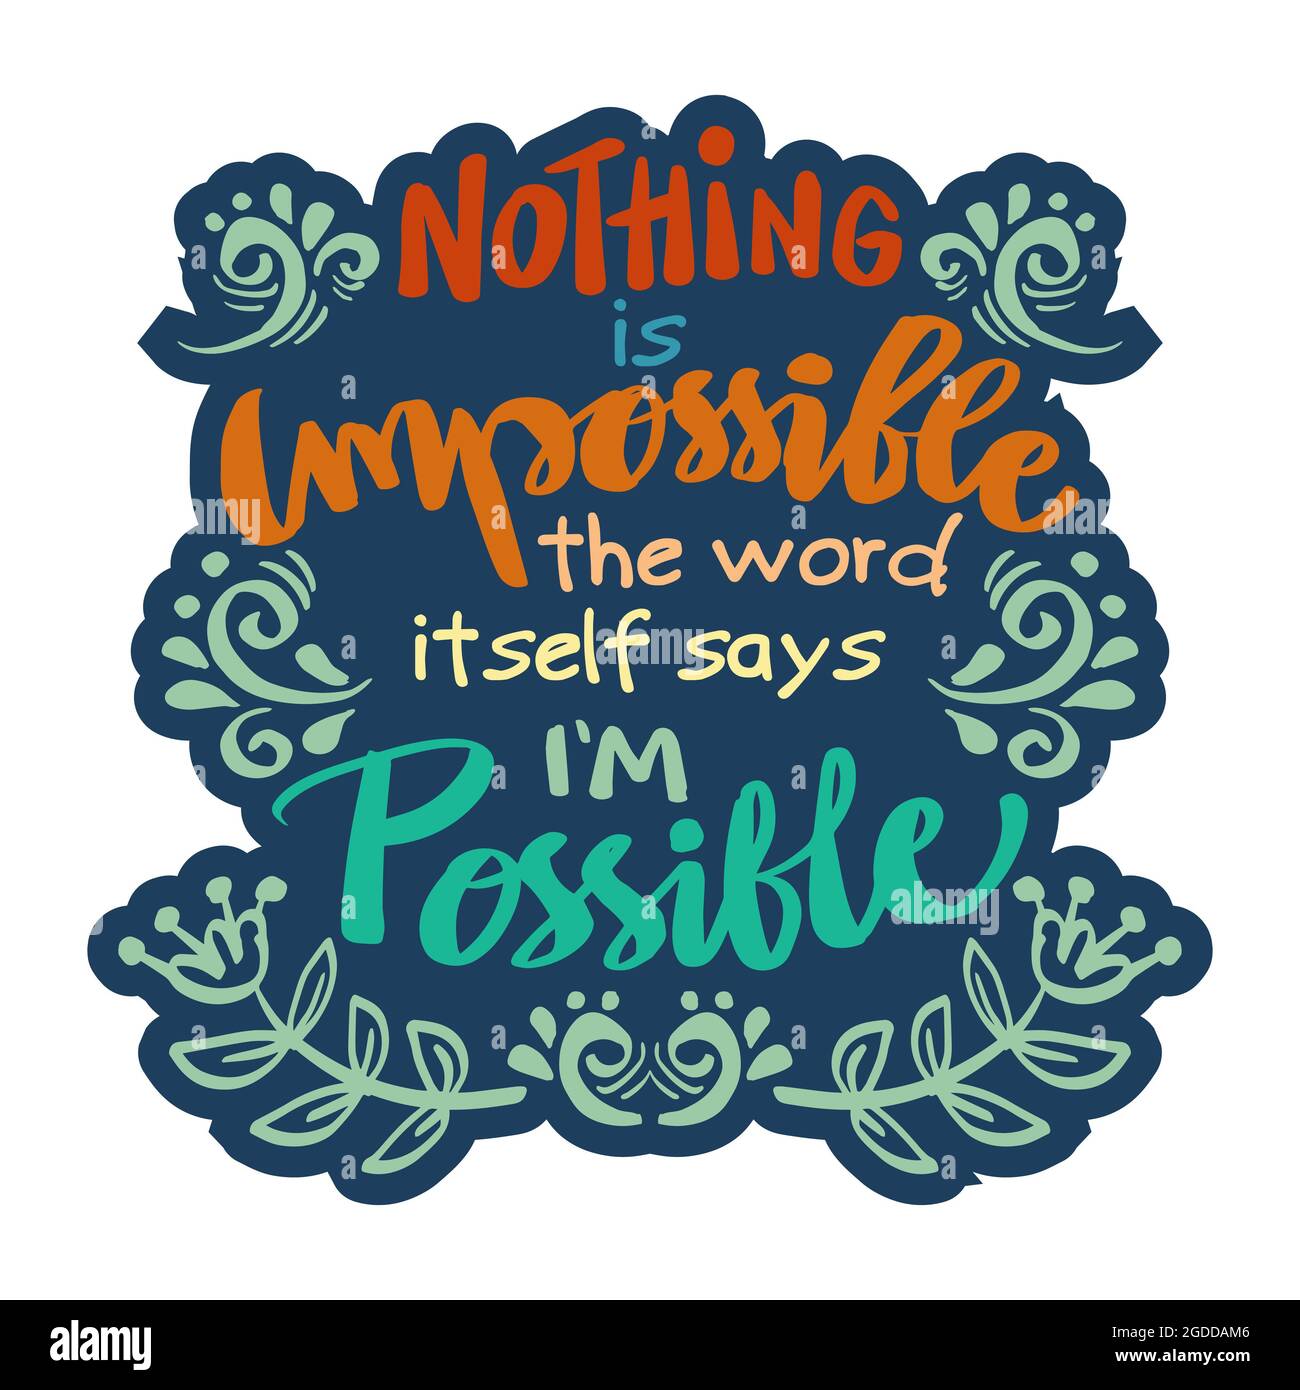 Nothing is impossible the word itself says i'm possible. Hand lettering motivational quote. Stock Photo